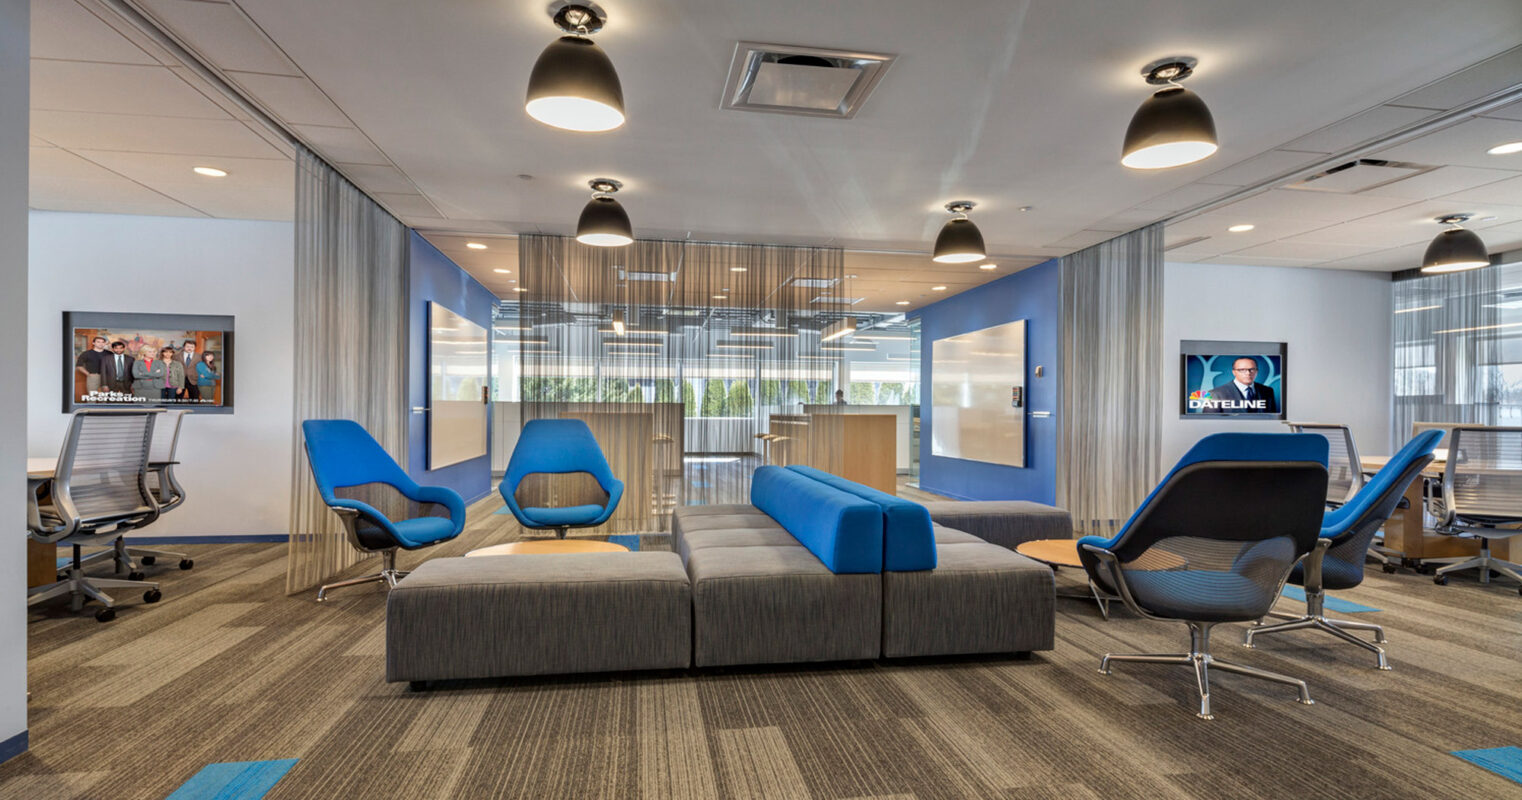 Open-plan office space featuring sleek, modular seating in shades of blue and gray, complemented by floor-to-ceiling windows with sheer drapery. Overhead, industrial-chic pendant lights illuminate the area. A trio of ergonomic office chairs and a multimedia display punctuate the room's functionality.